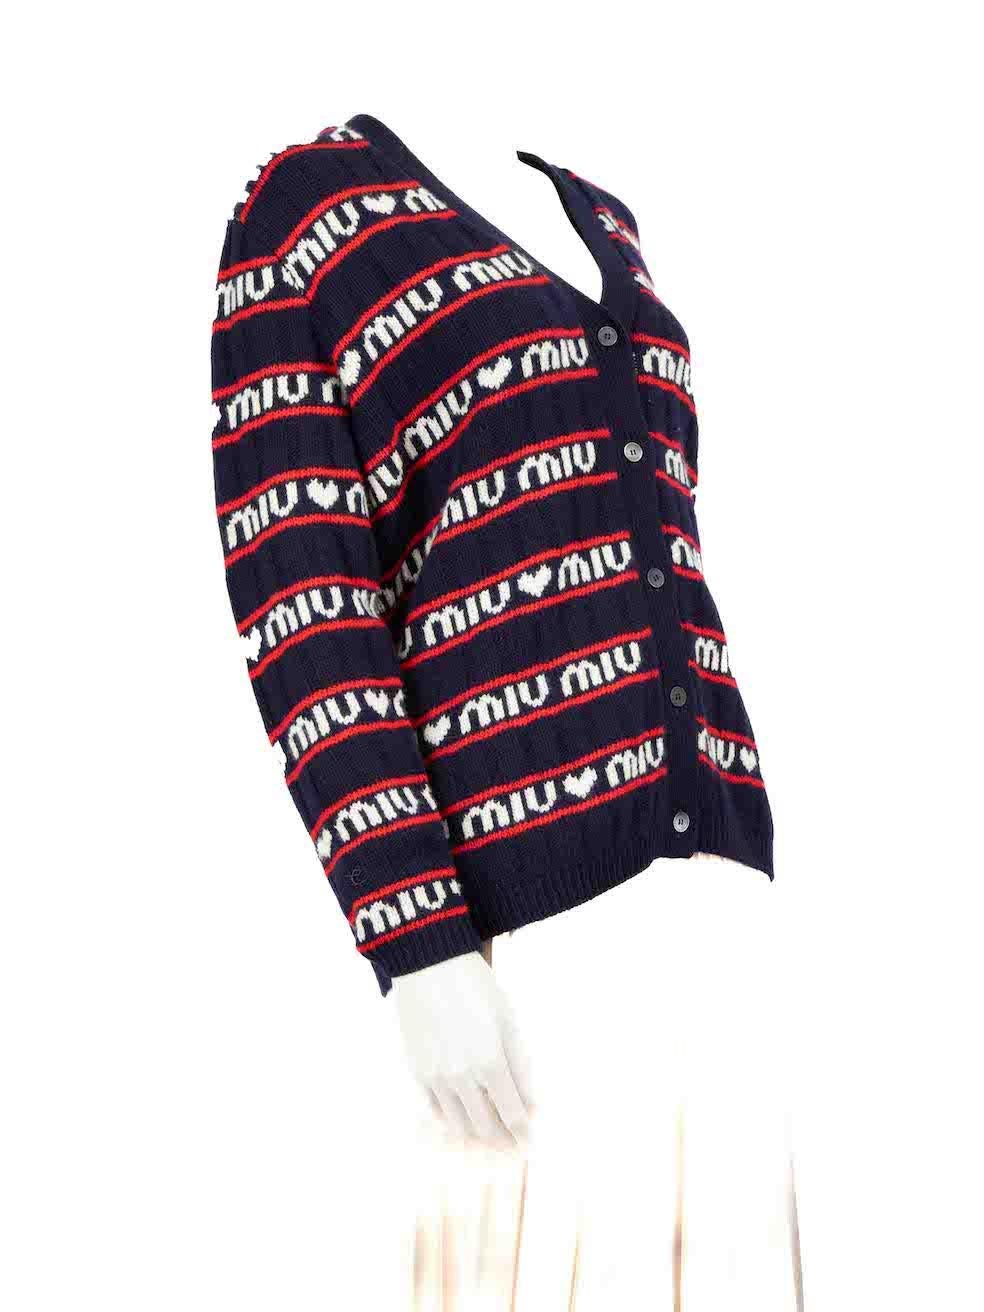 CONDITION is Very good. Minimal wear to the cardigan is evident. Overall pilling especially to the front and sleeves of the cardigan. Pull to weave on the back left side and small scratches to the buttons on this used Miu Miu designer resale item.
